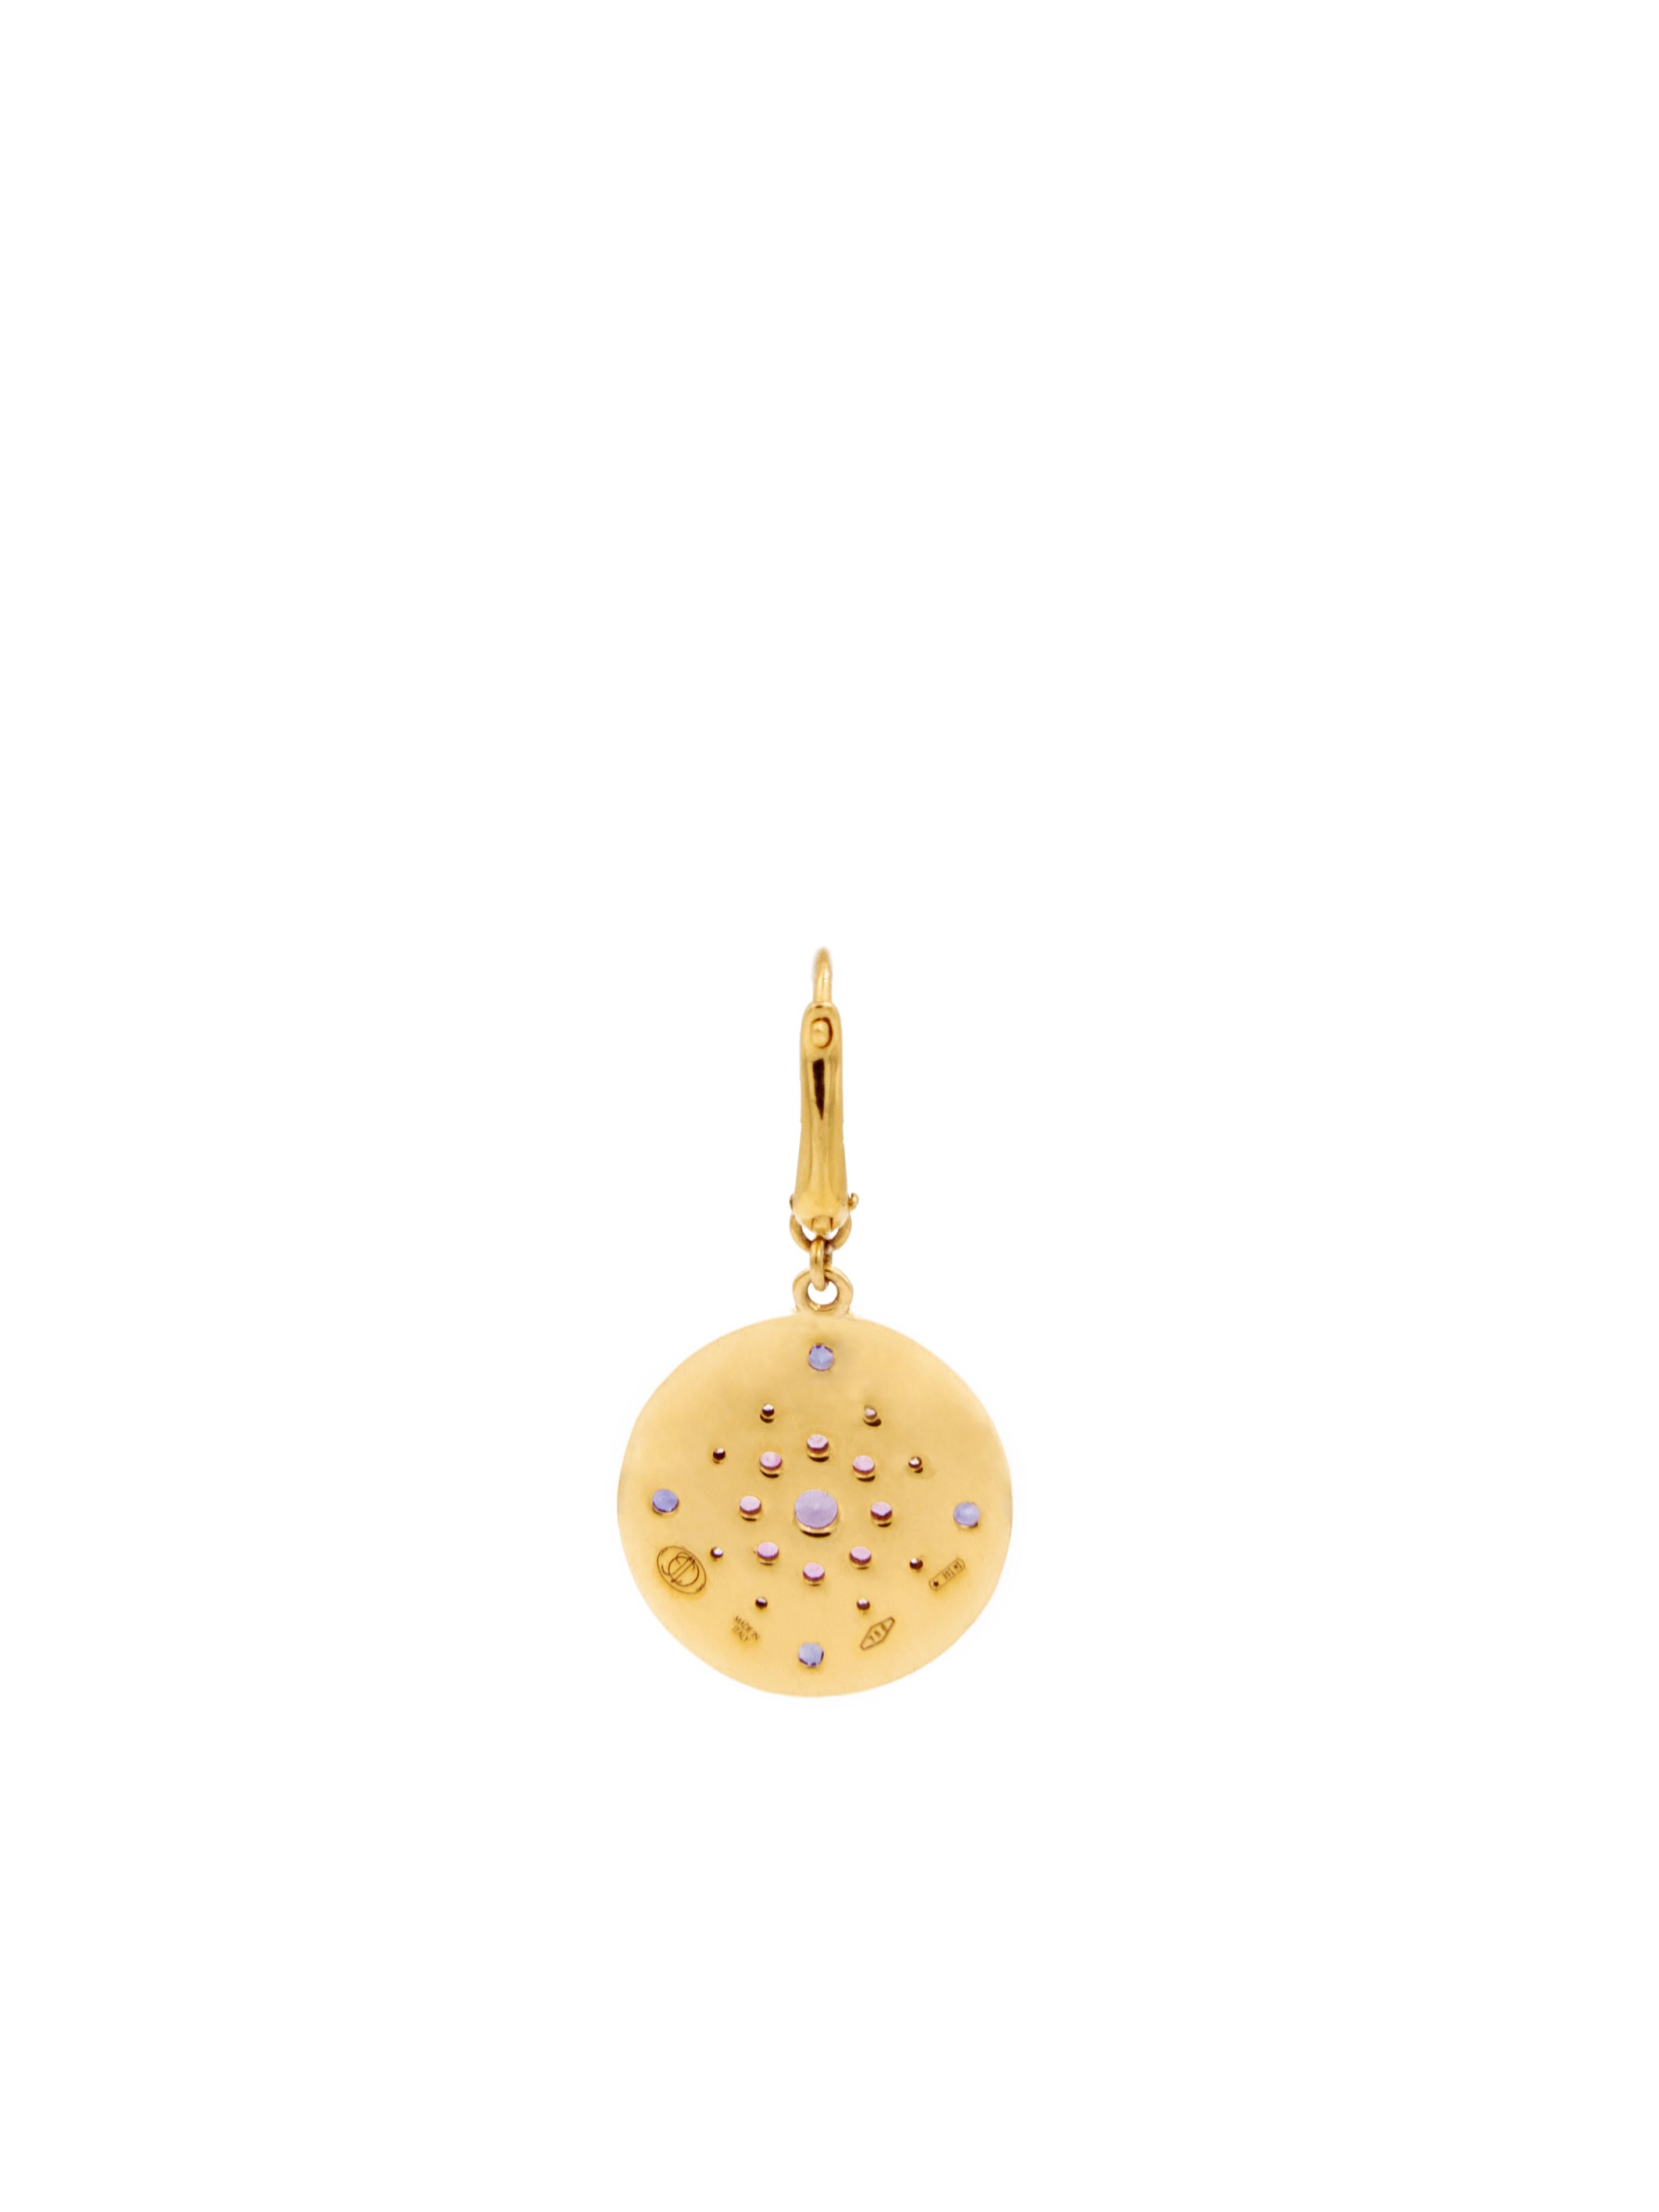 Round Cut Julia-Didon Cayre 18 Karat Yellow Gold Diamond Earrings with Sapphires For Sale